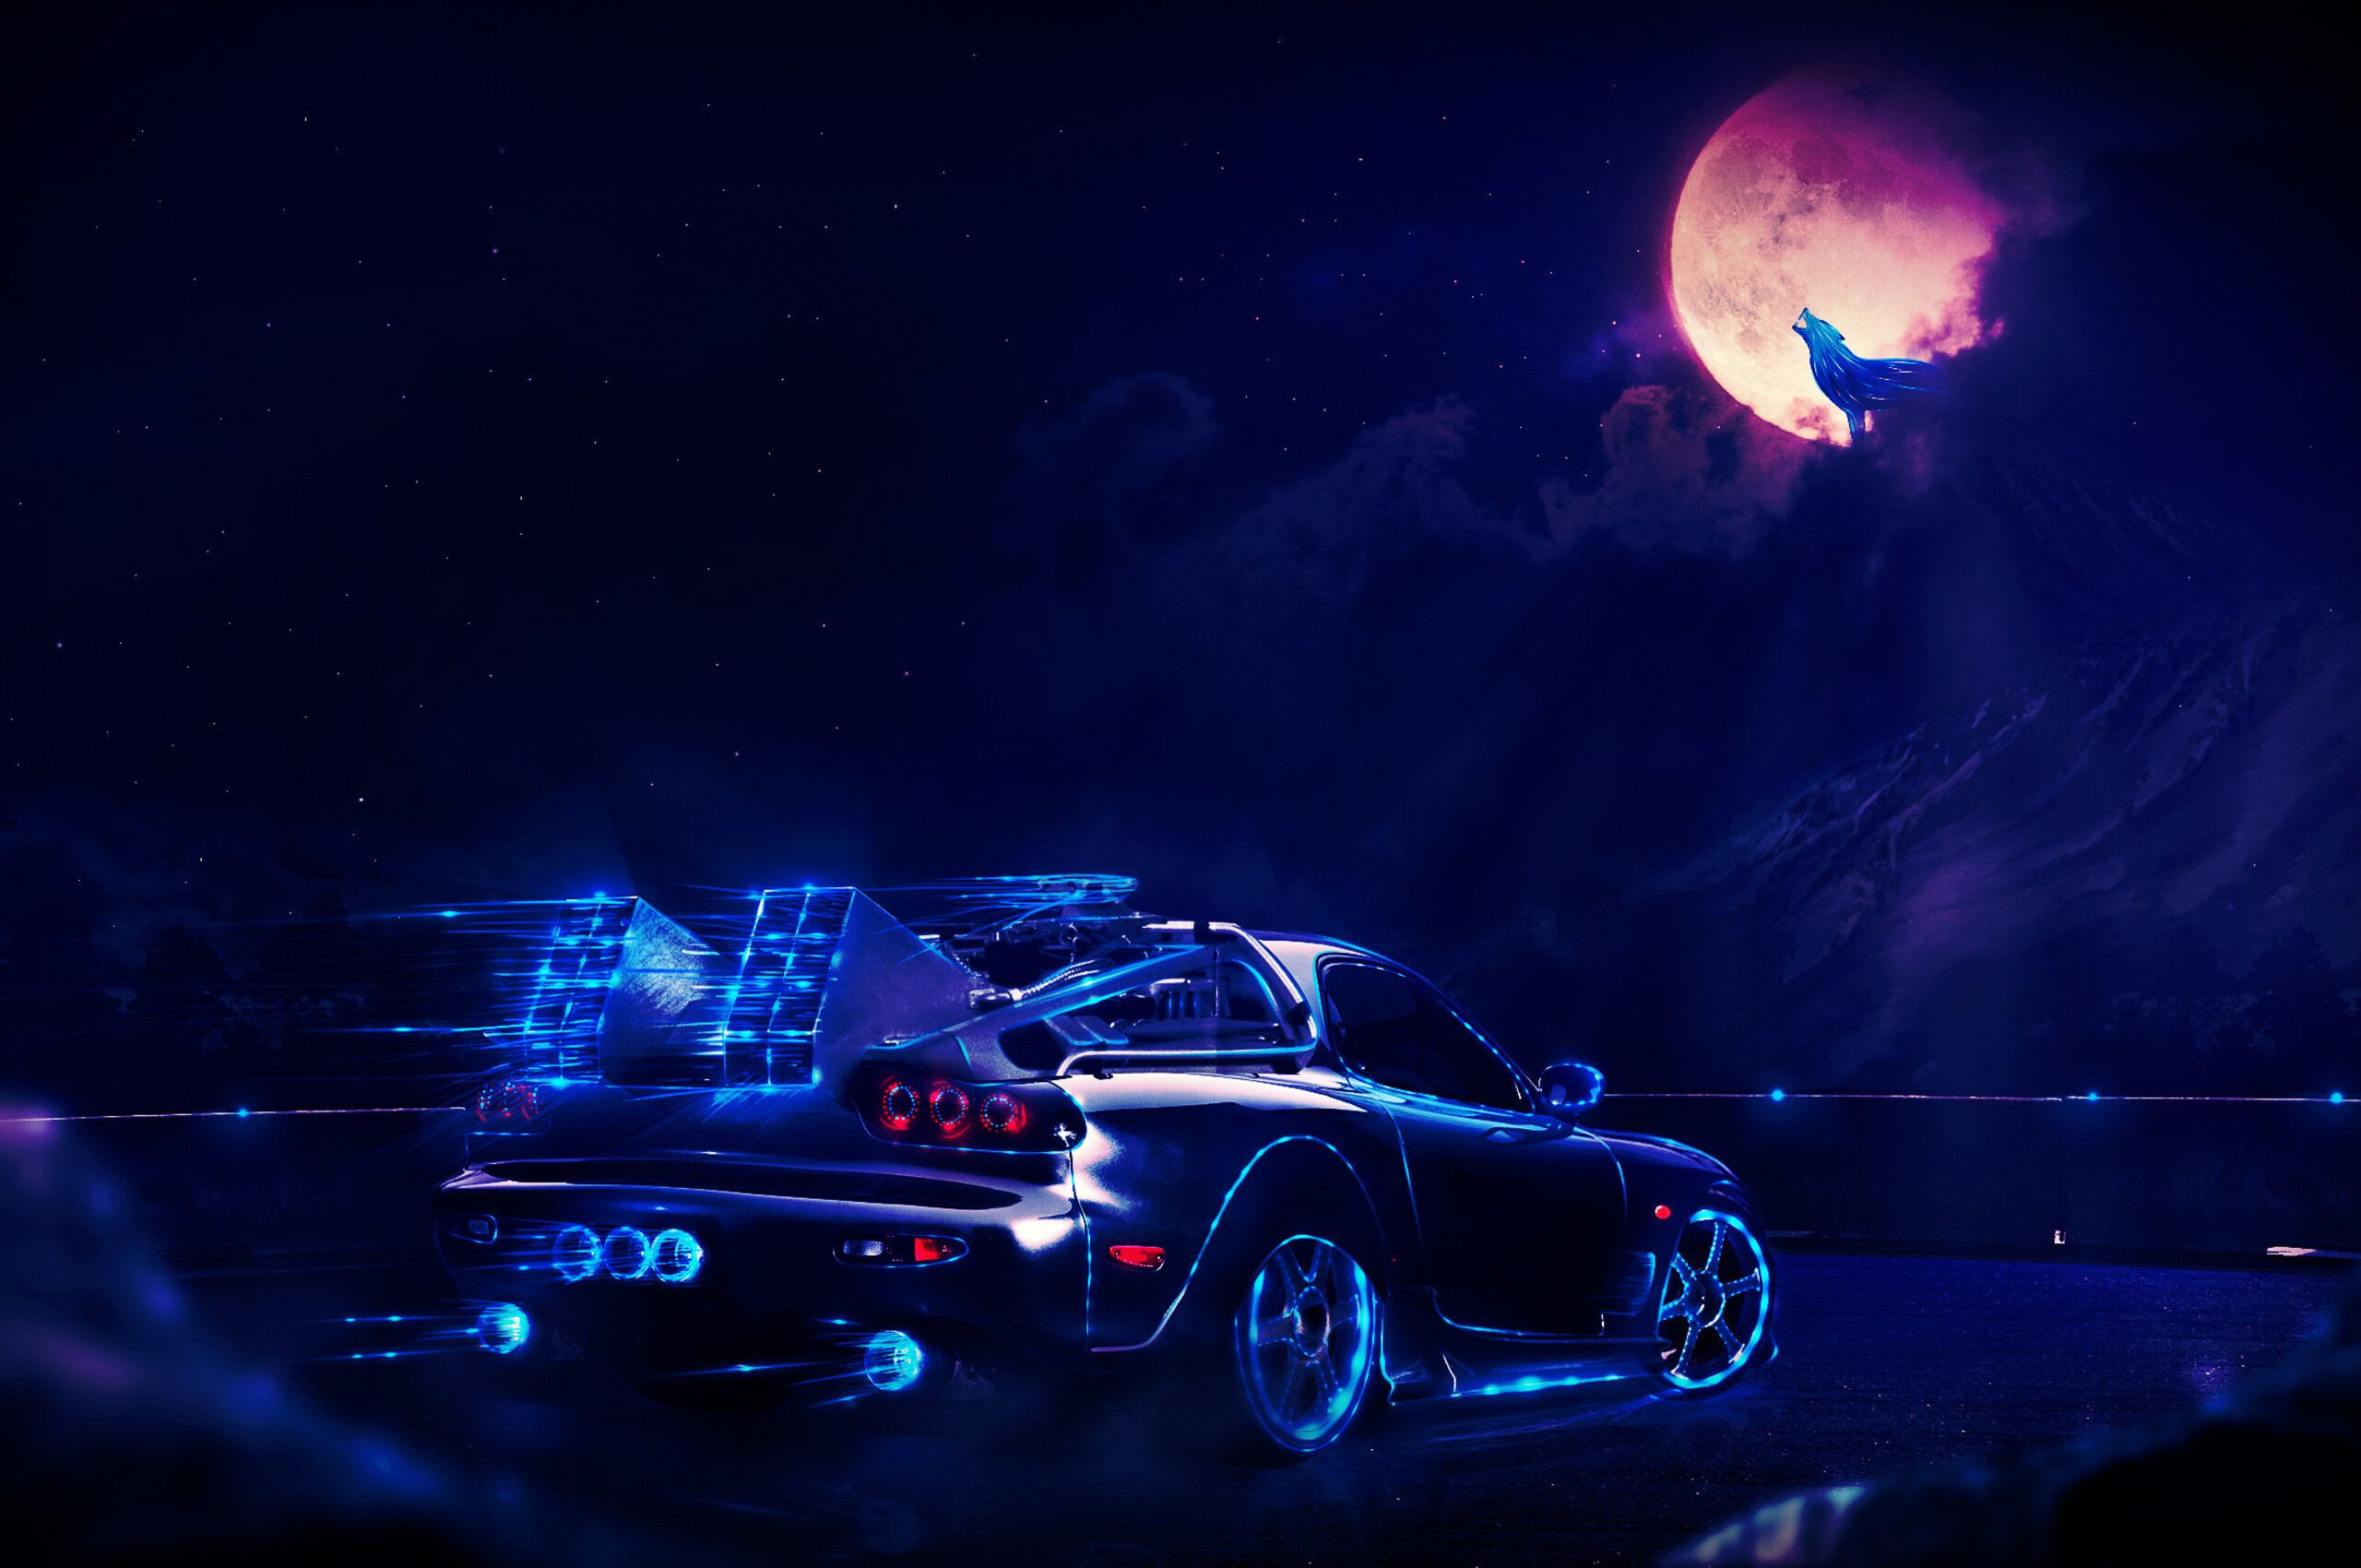 2560x1700 Madza Rx7 Neon Wolf Night Artwork Chromebook Pixel HD 4k Wallpapers, Image, Backgrounds, Photos and Pictures